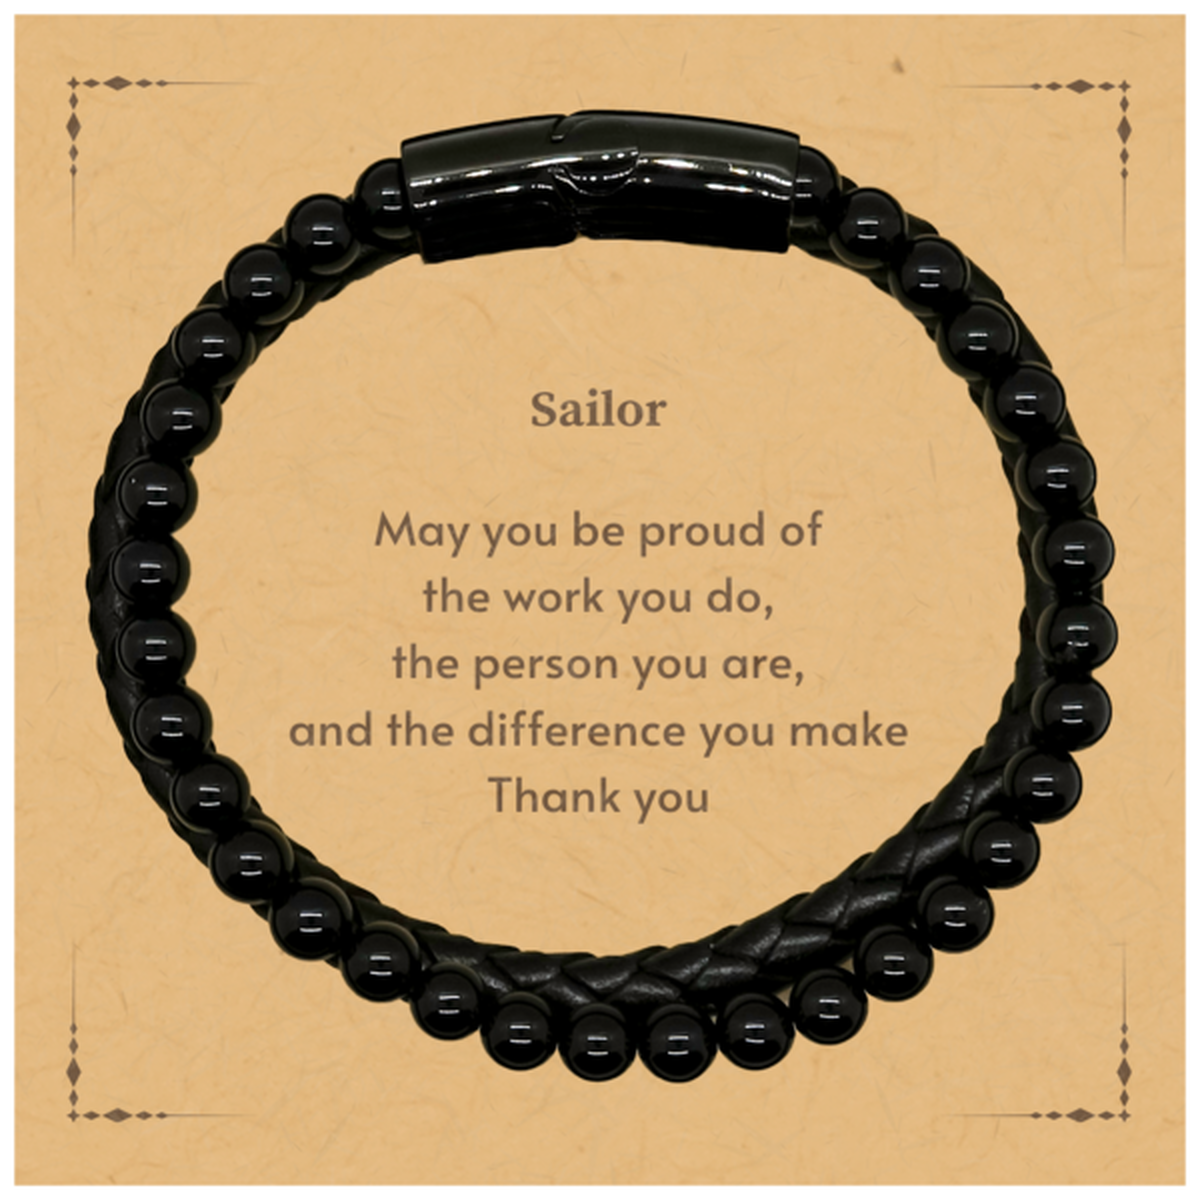 Heartwarming Stone Leather Bracelets Retirement Coworkers Gifts for Sailor, Sailor May You be proud of the work you do, the person you are Gifts for Boss Men Women Friends